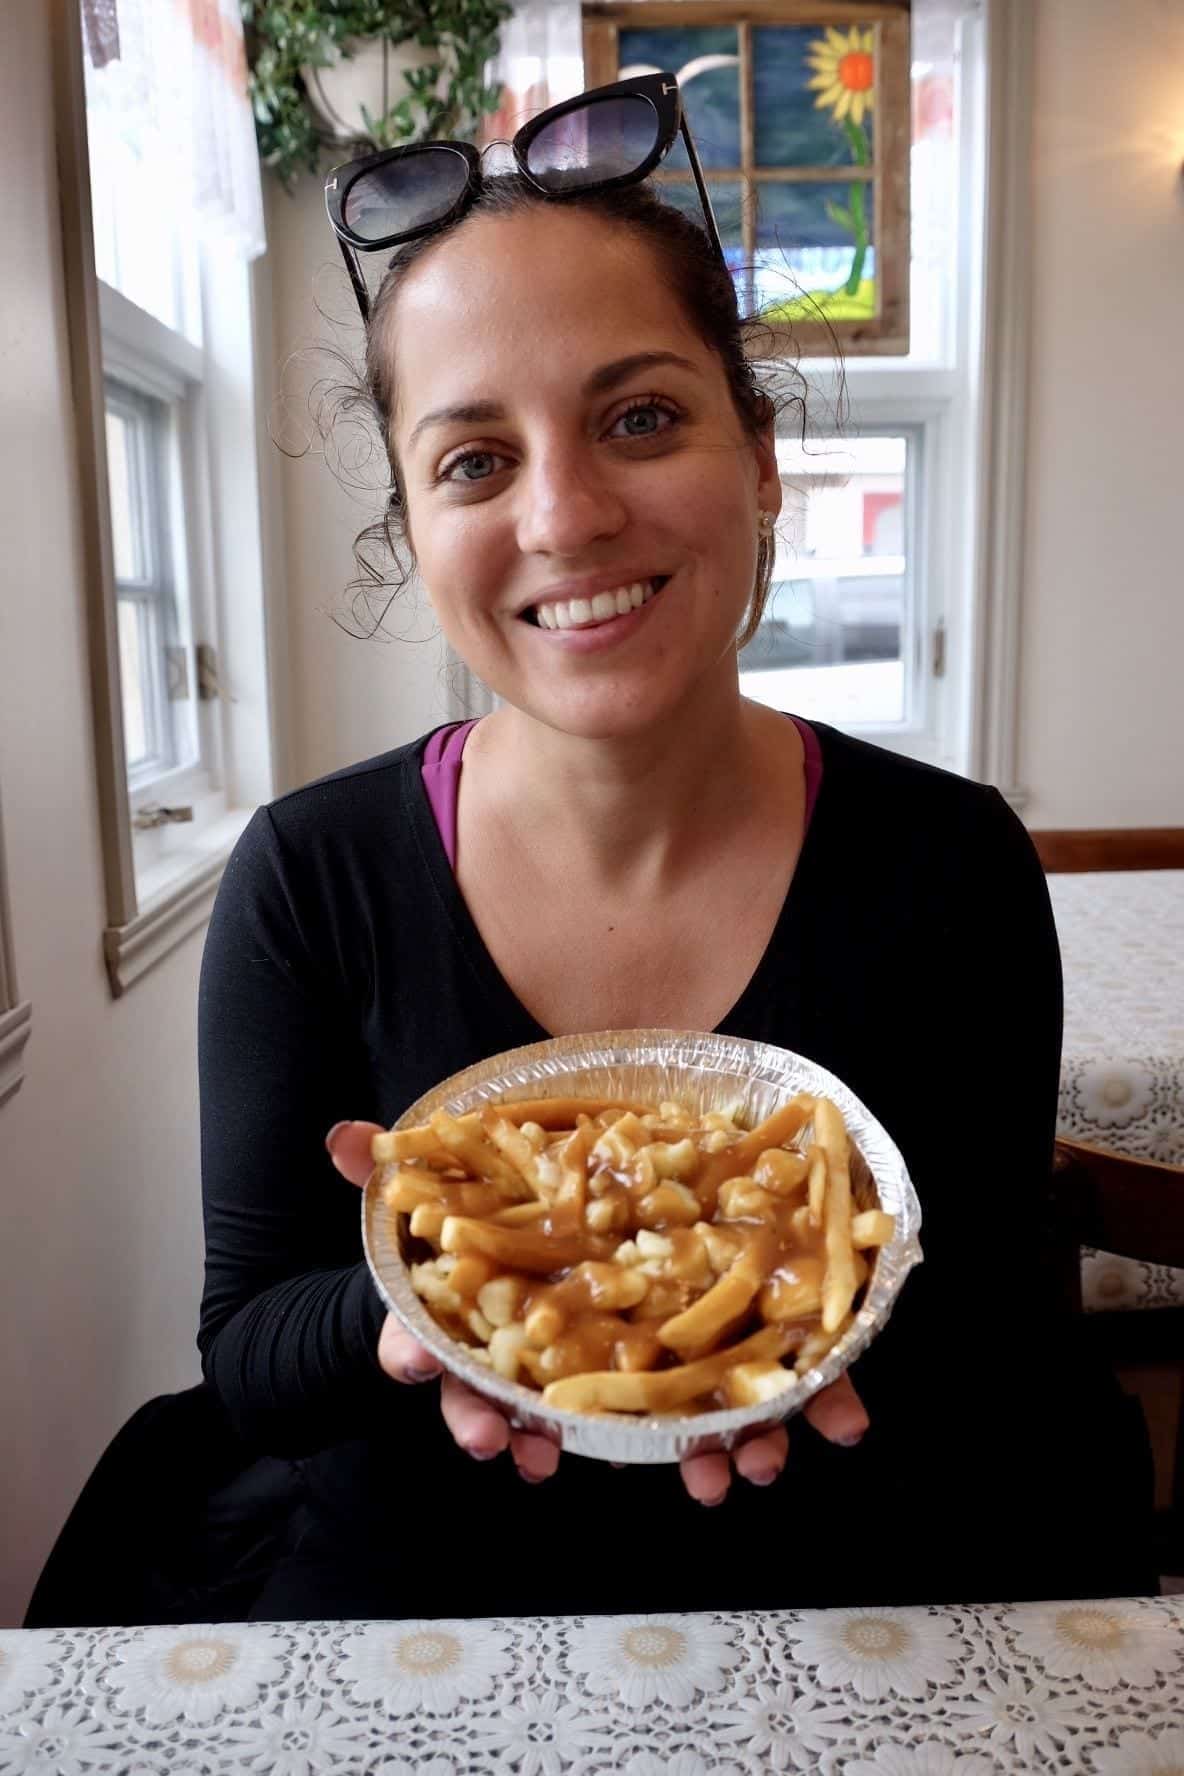 Kate holds a bowl of poutine in her hand and smiles.